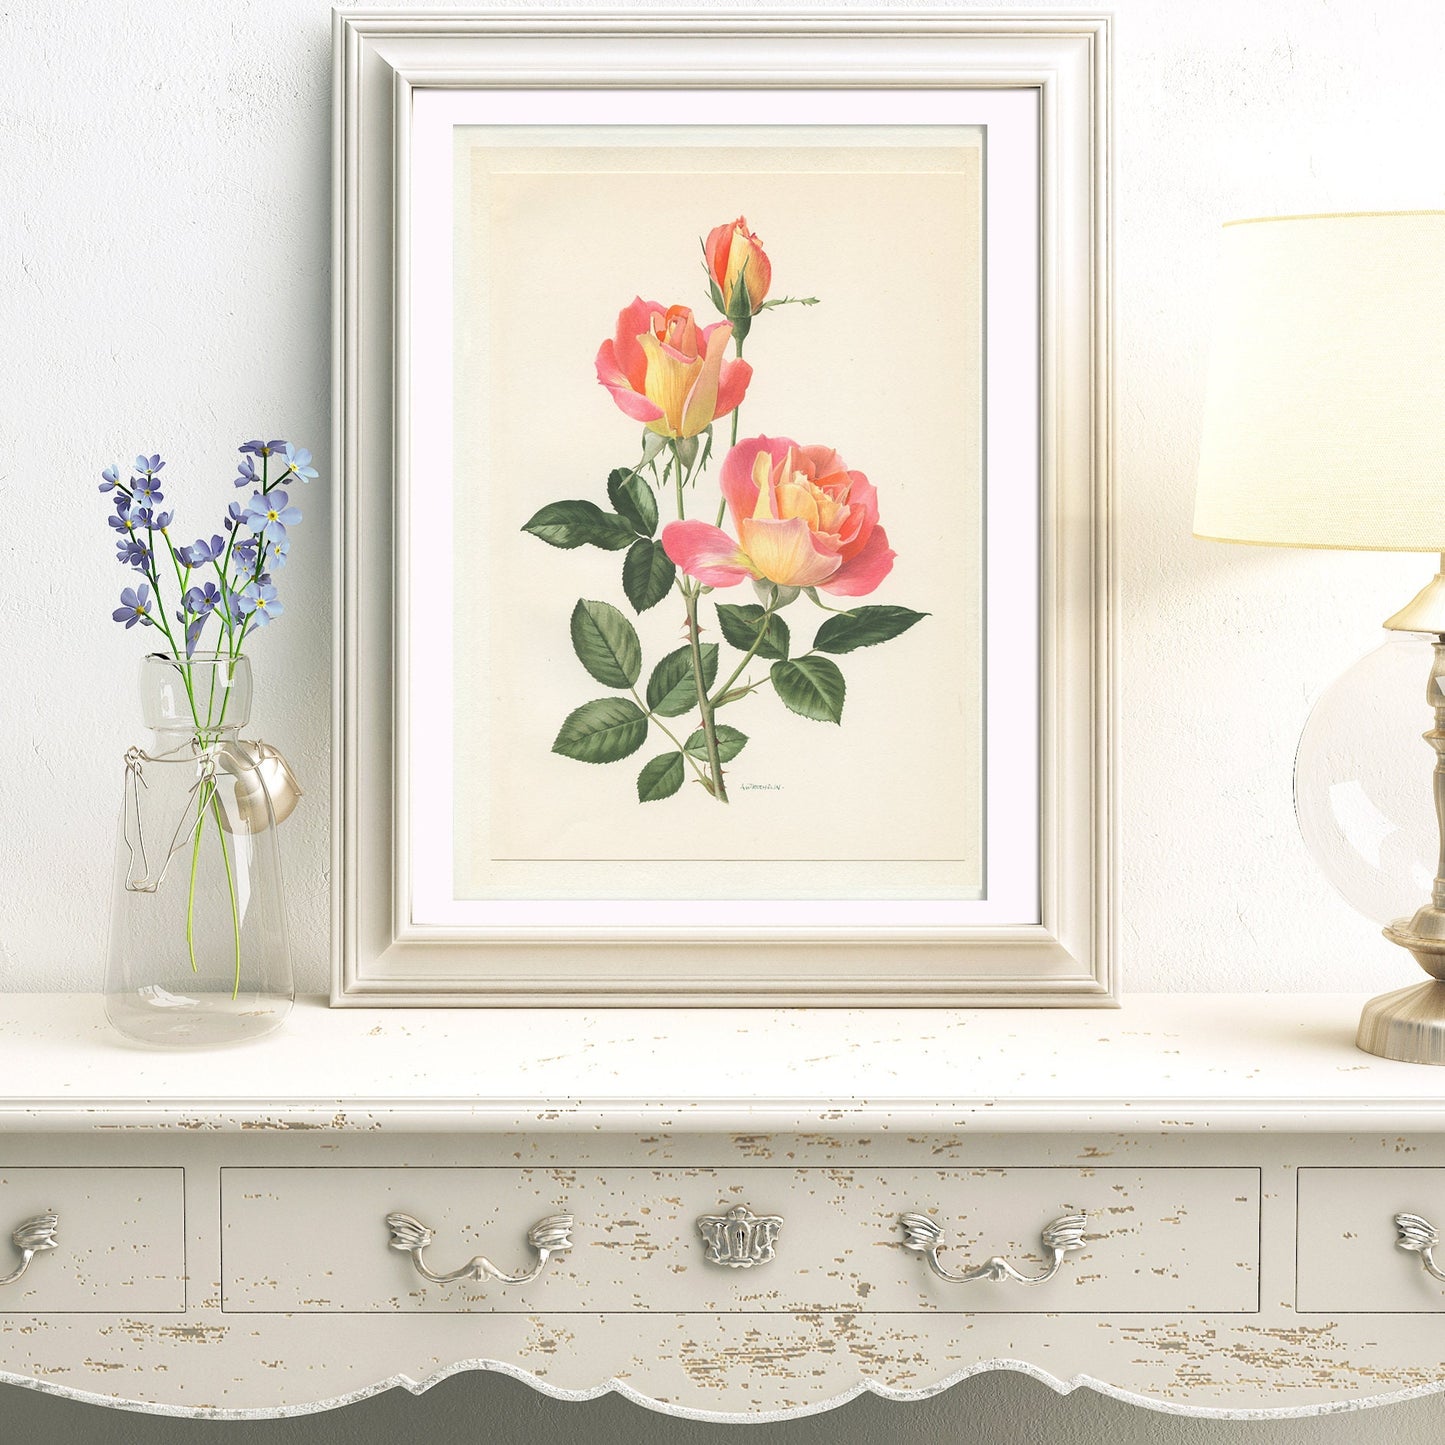 Sea Pearl Pink rose flower botanical print from1967. Small vintage French country decor floral  wall art. Plant teacher gardener gift.